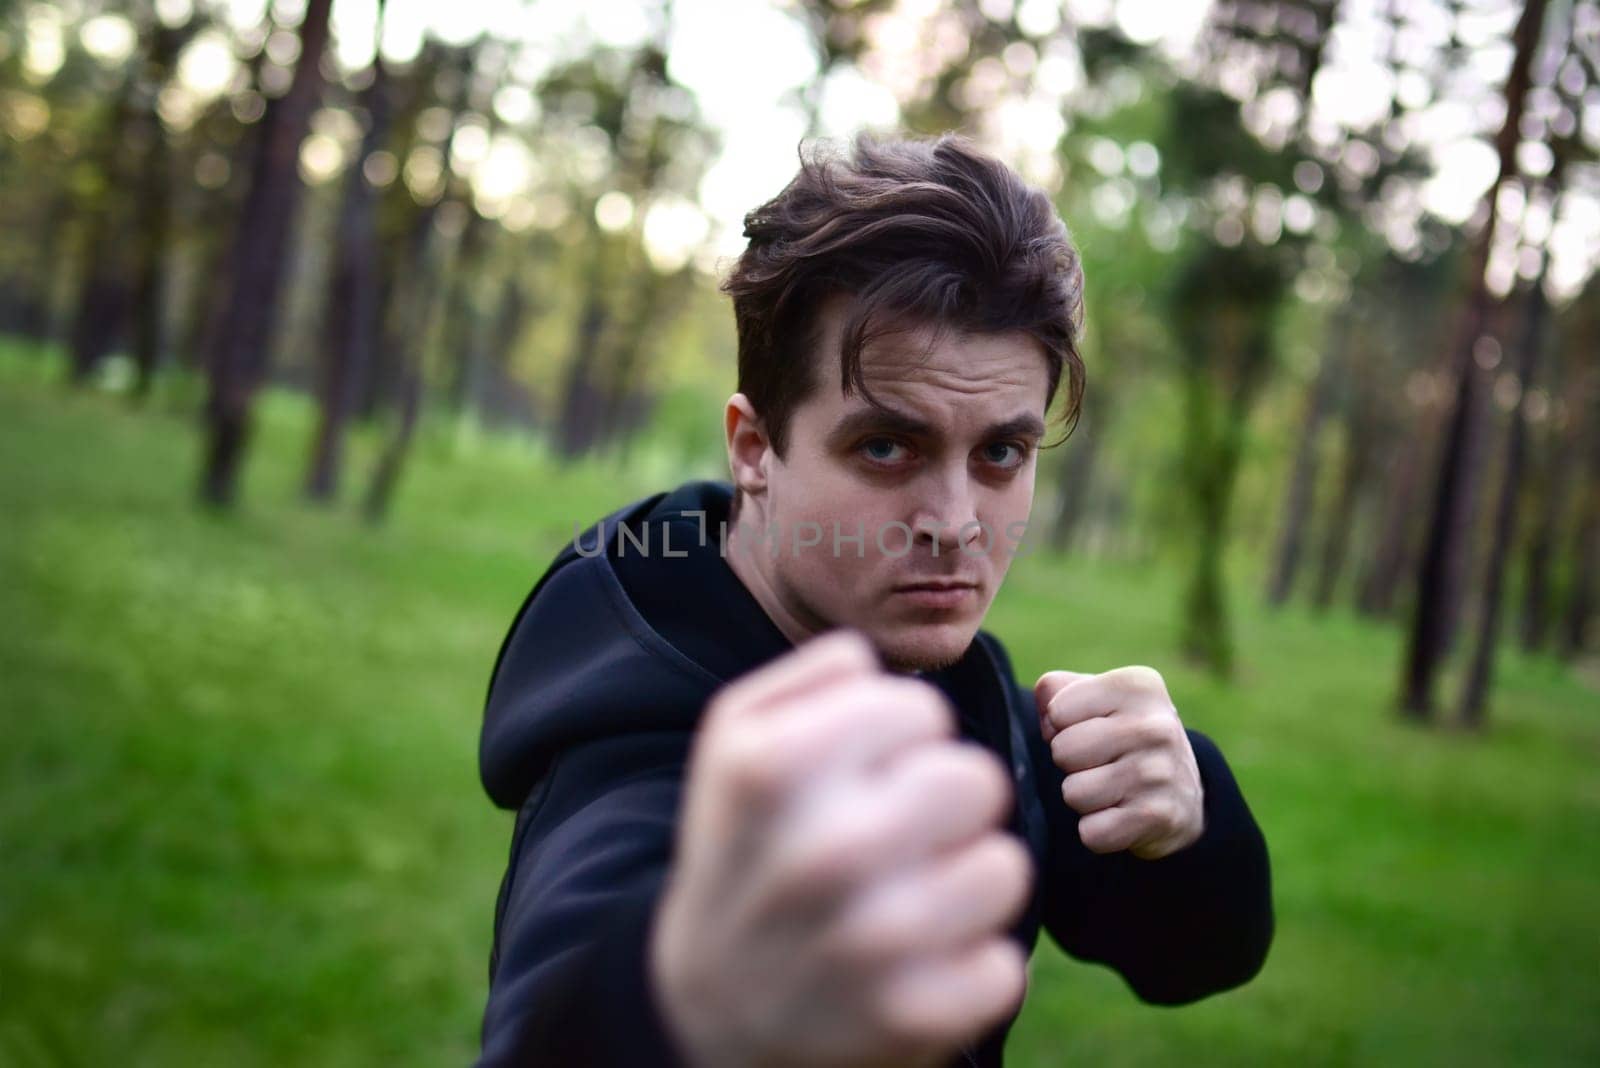 sporty young man in a sporty black jacket in a fighting pose raising his fist for a punch against a background of forest trees.